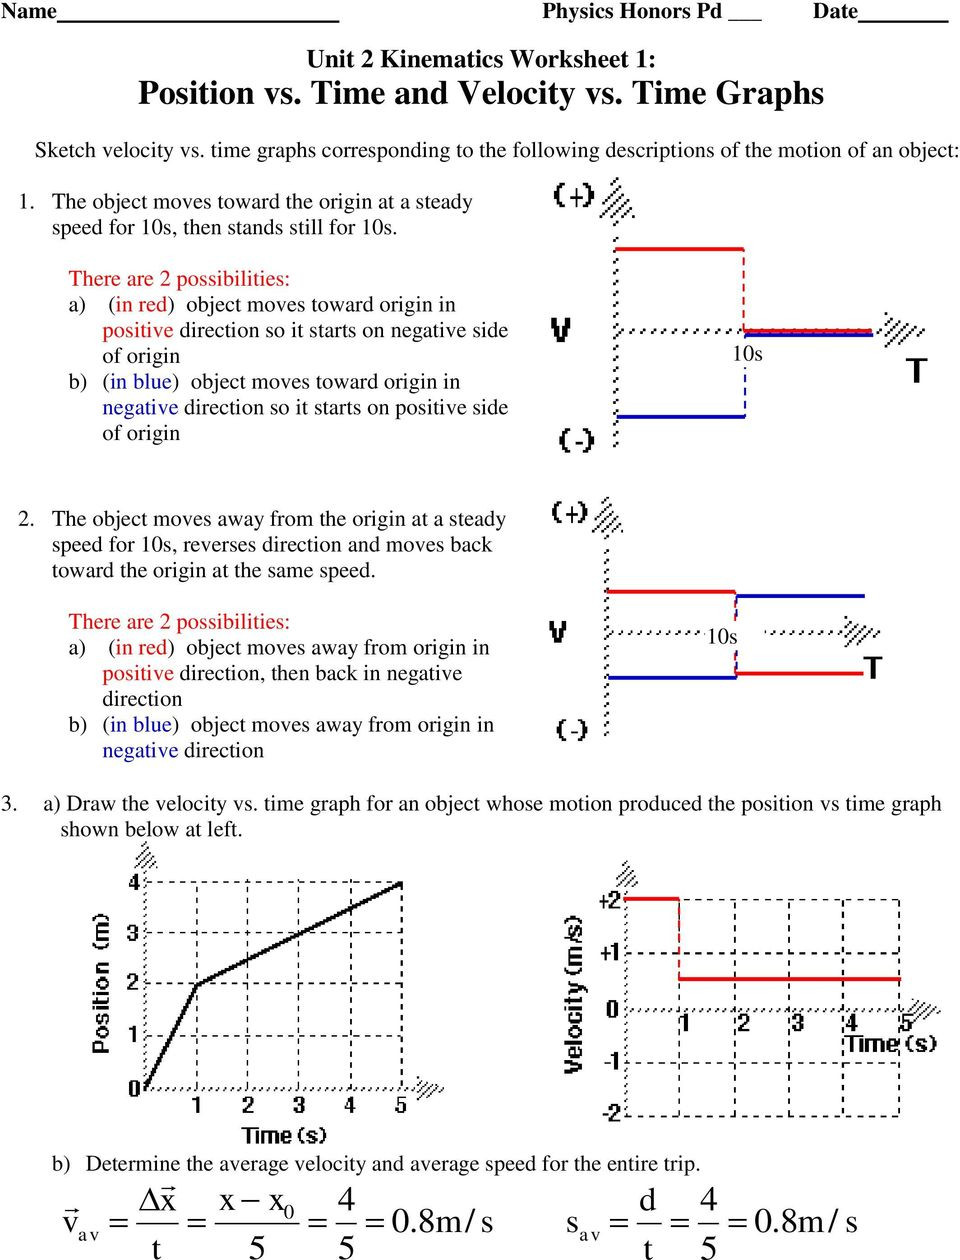 Velocity Time Graph Worksheet Unit 2 Kinematics Worksheet 1 Position Vs Time and